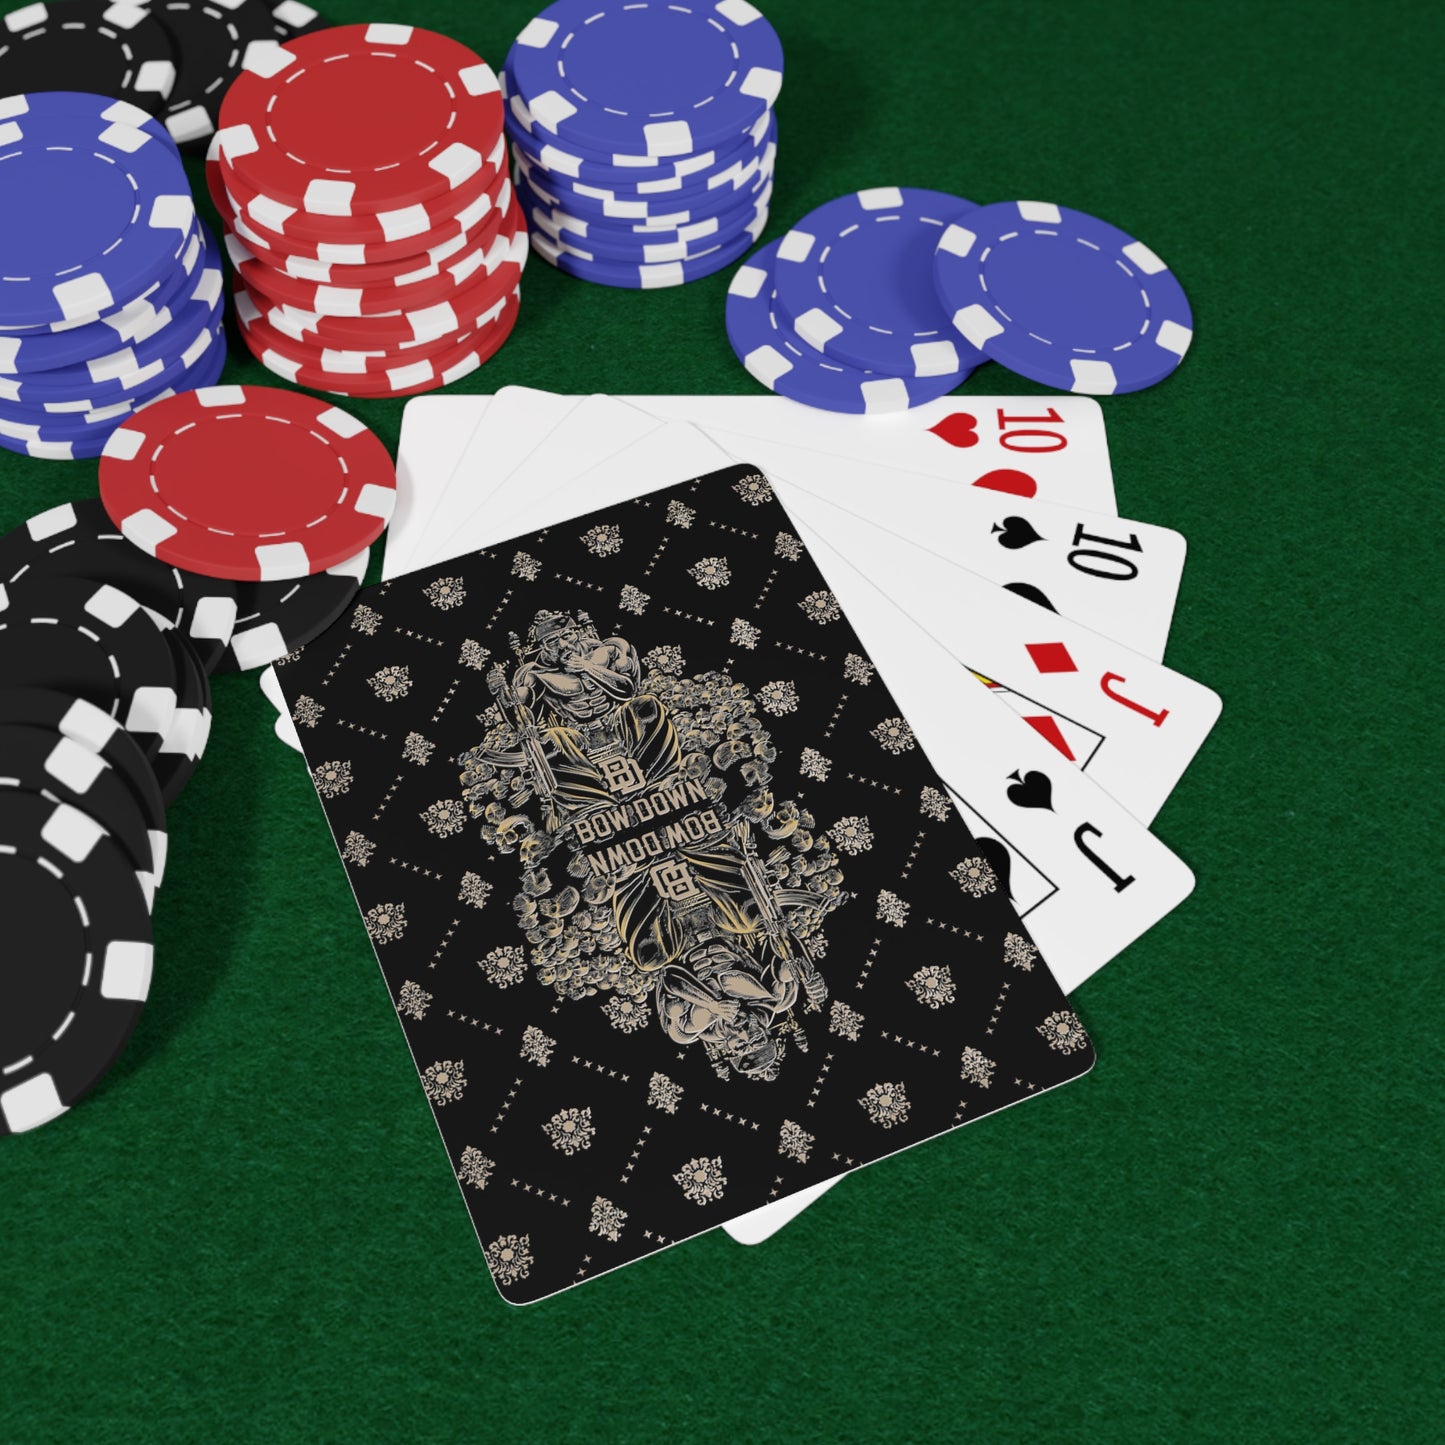 BOW DOWN CLOTHING Poker Cards